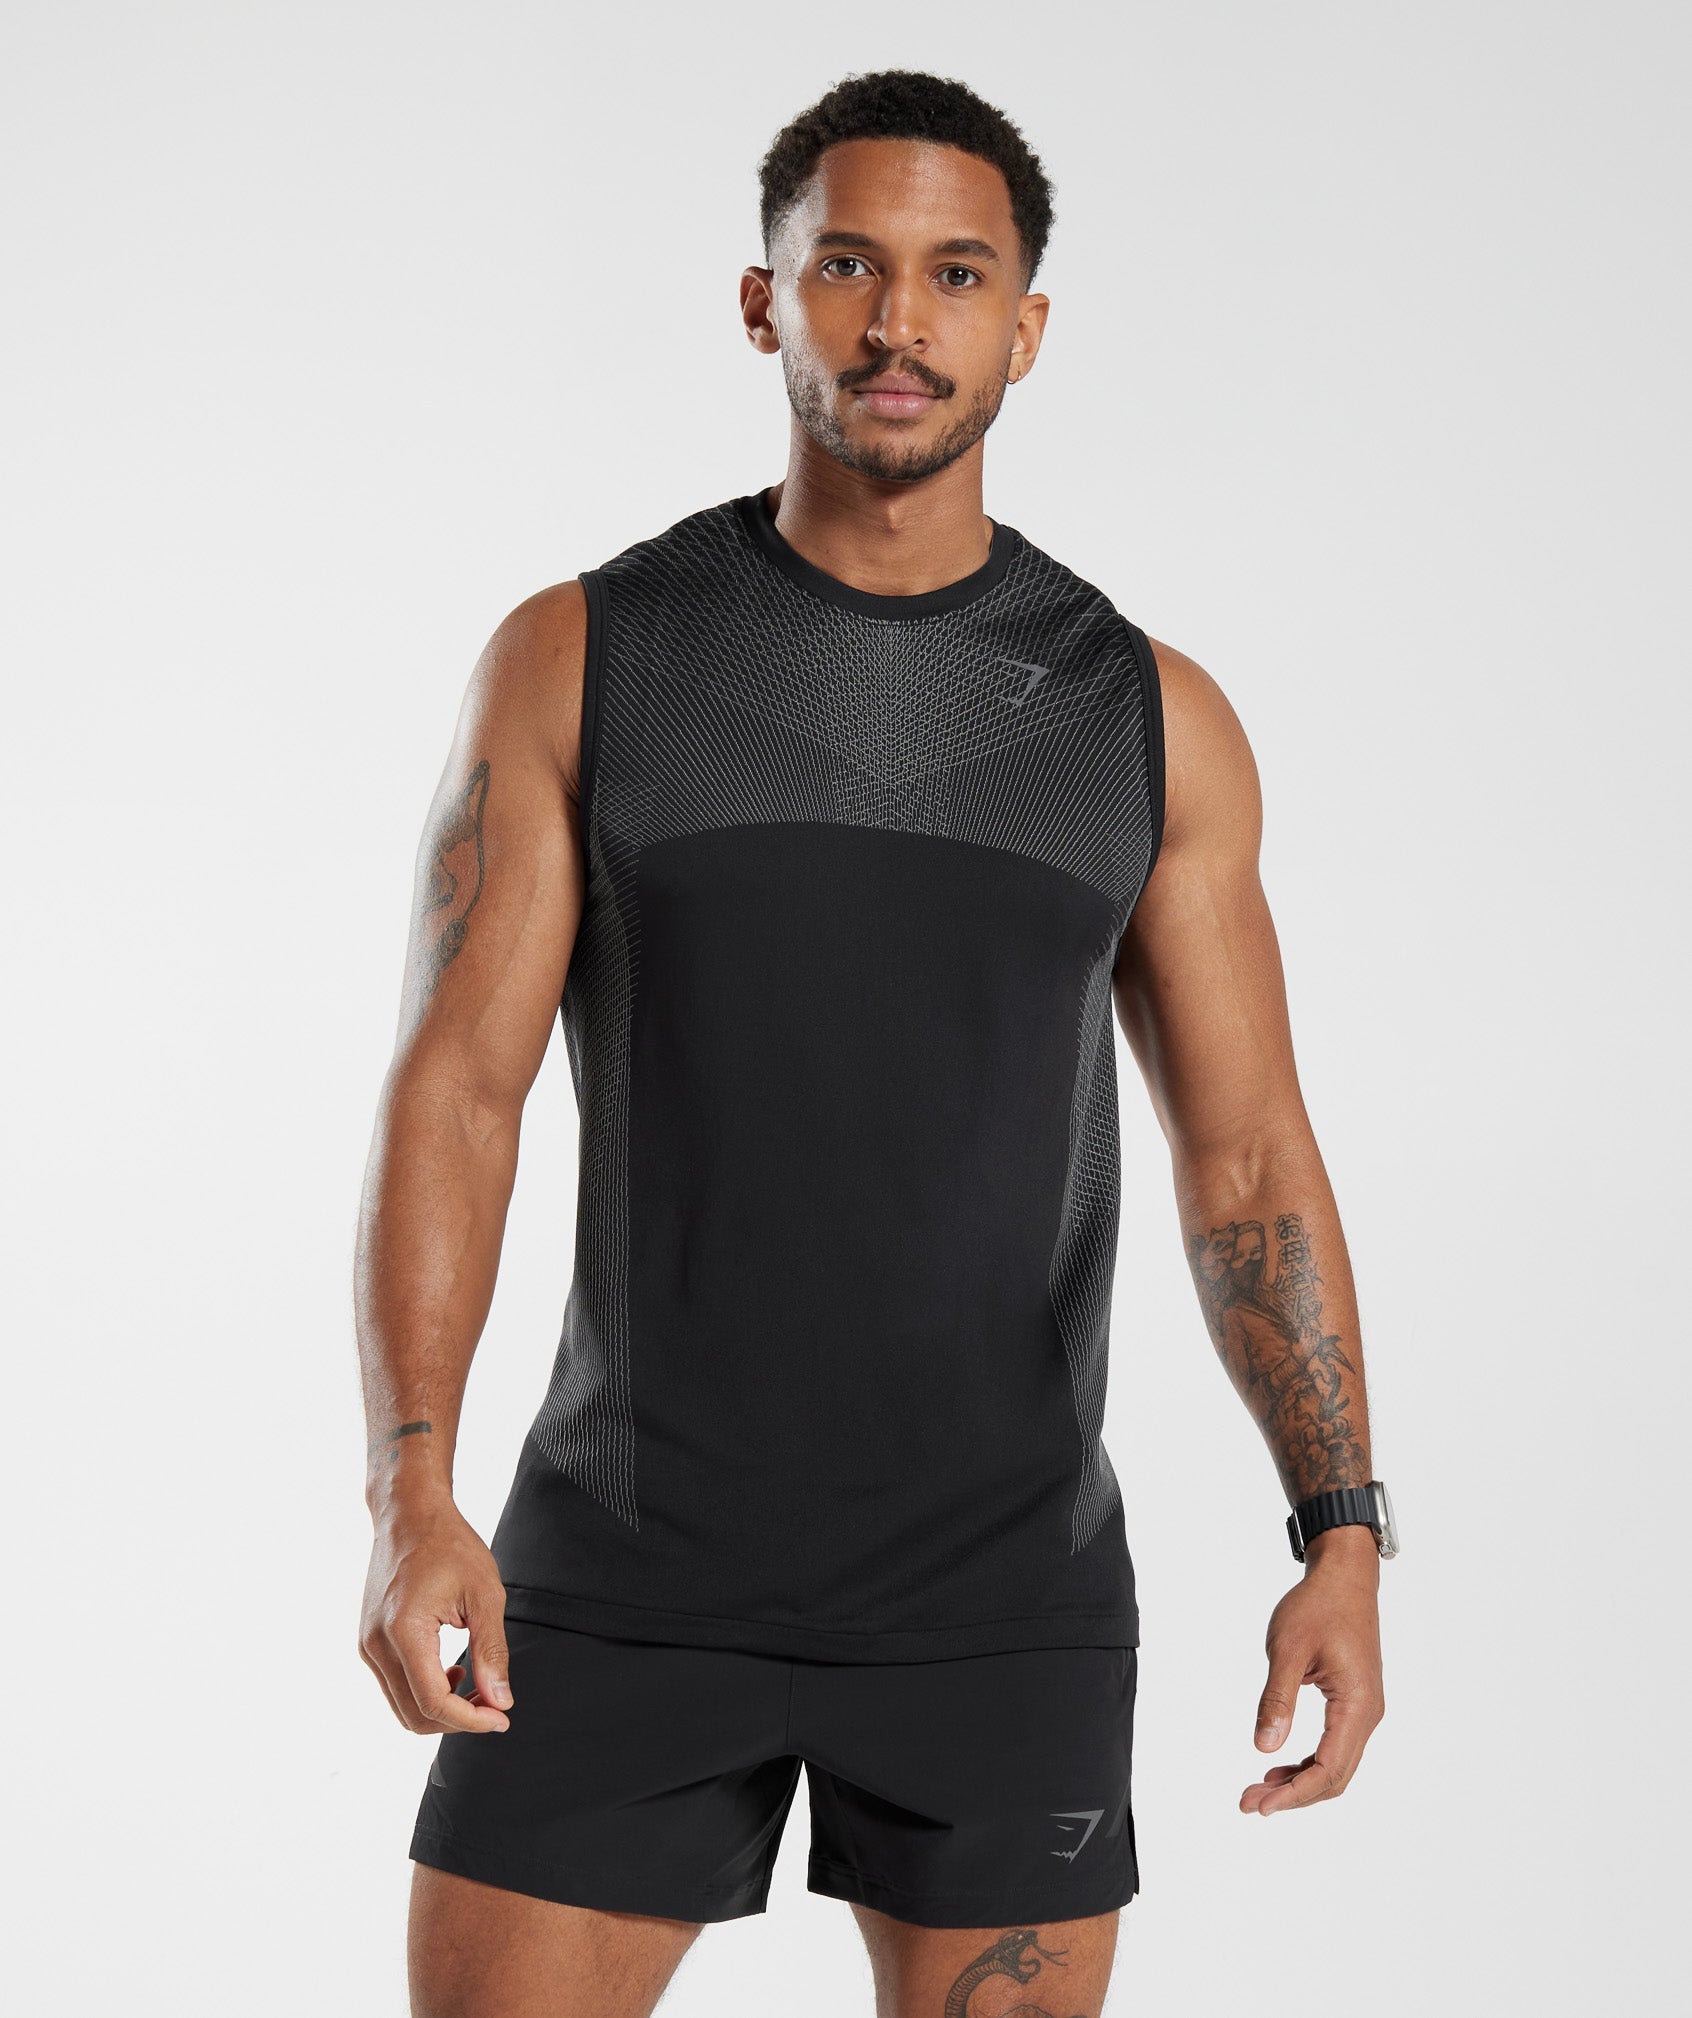 Gymshark Onyx Seamless Tank - Black The Gymshark Onyx Seamless Tank is part  of something special. Seamless performance wear and remarkable design like  you have …